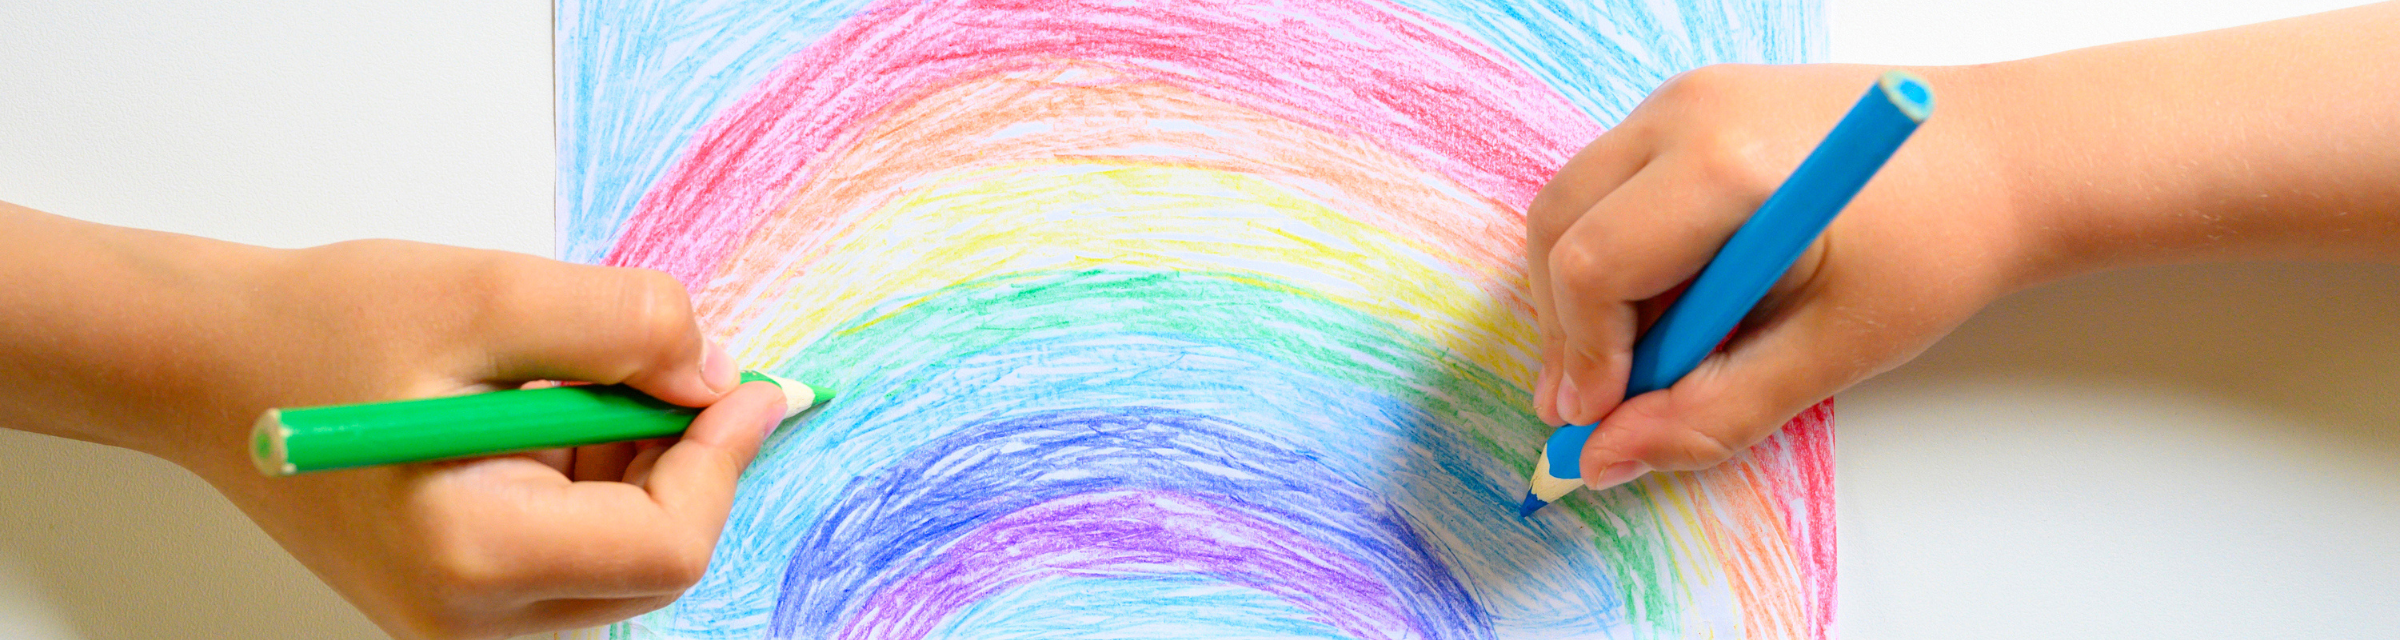 hands drawing a rainbow with crayons